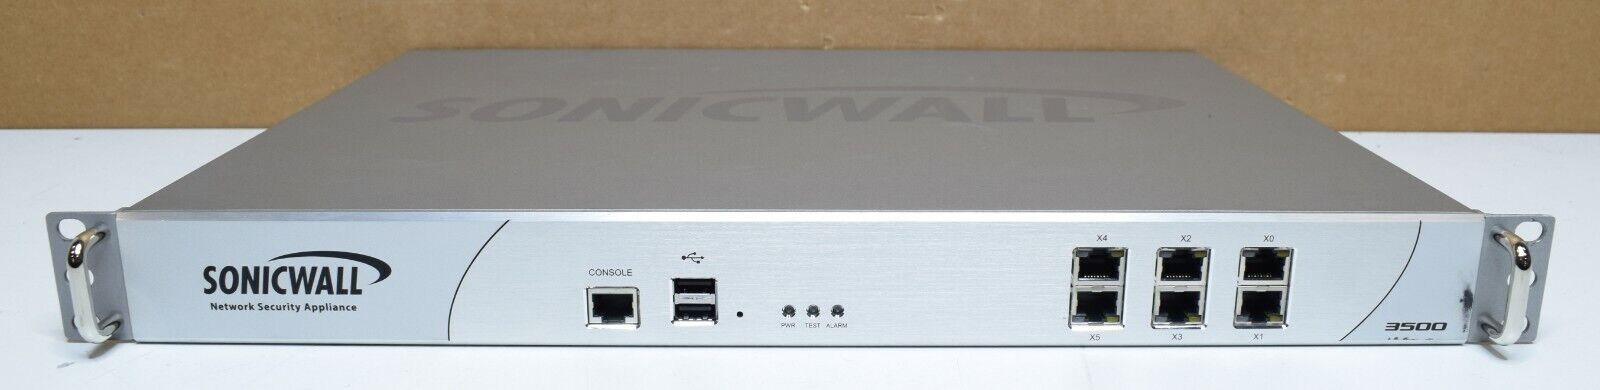 SonicWALL Network Security Appliance Firewall NSA 3500 1RK21-071 | Tested/Reset